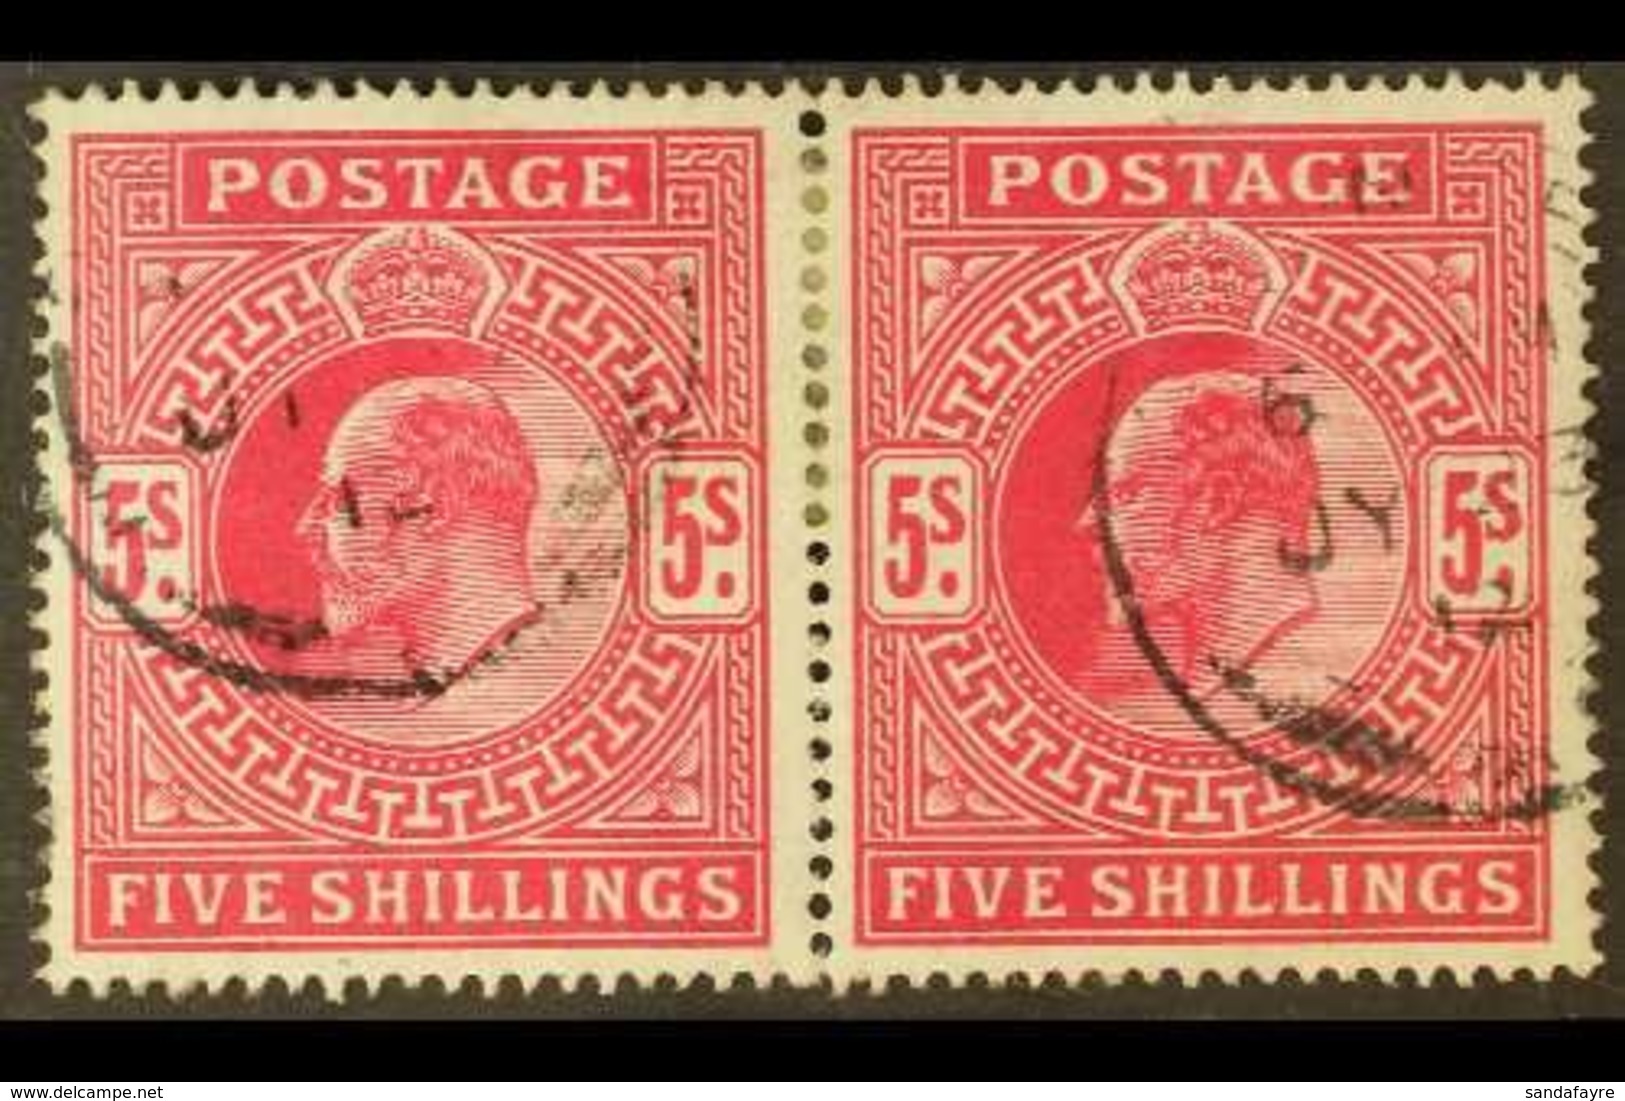 1902-10 5s Bright Carmine, SG 263, Very Fine Cds Used Horizontal PAIR. Fresh & Scarce. (2 Stamps) For More Images, Pleas - Unclassified